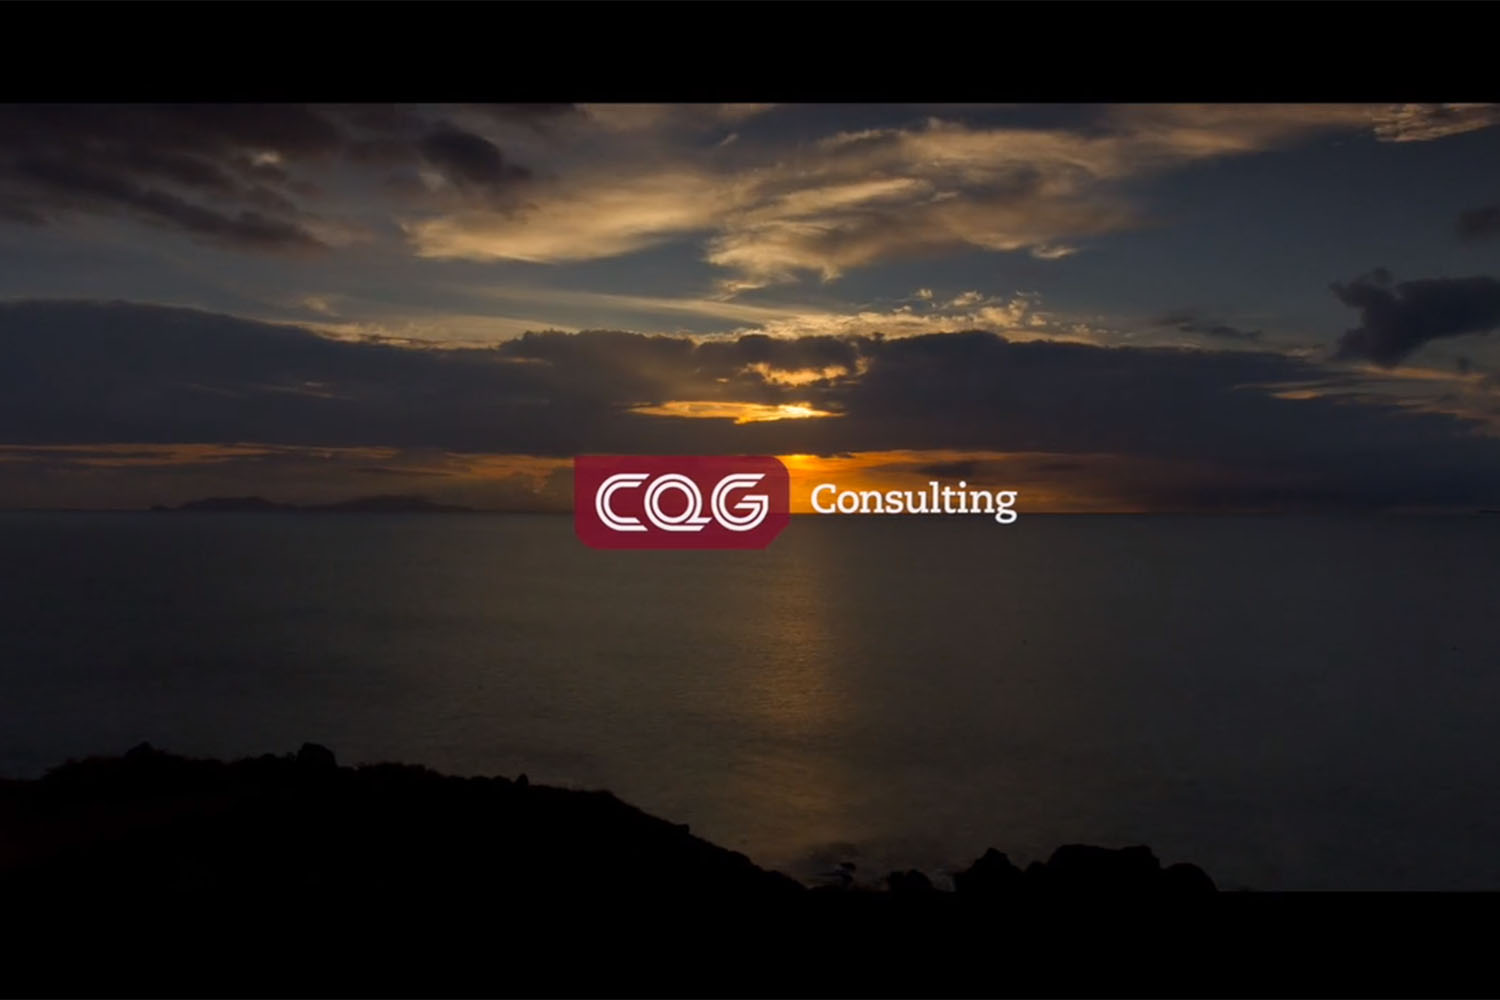 CQG CONSULTING - A MEMBER OF METS